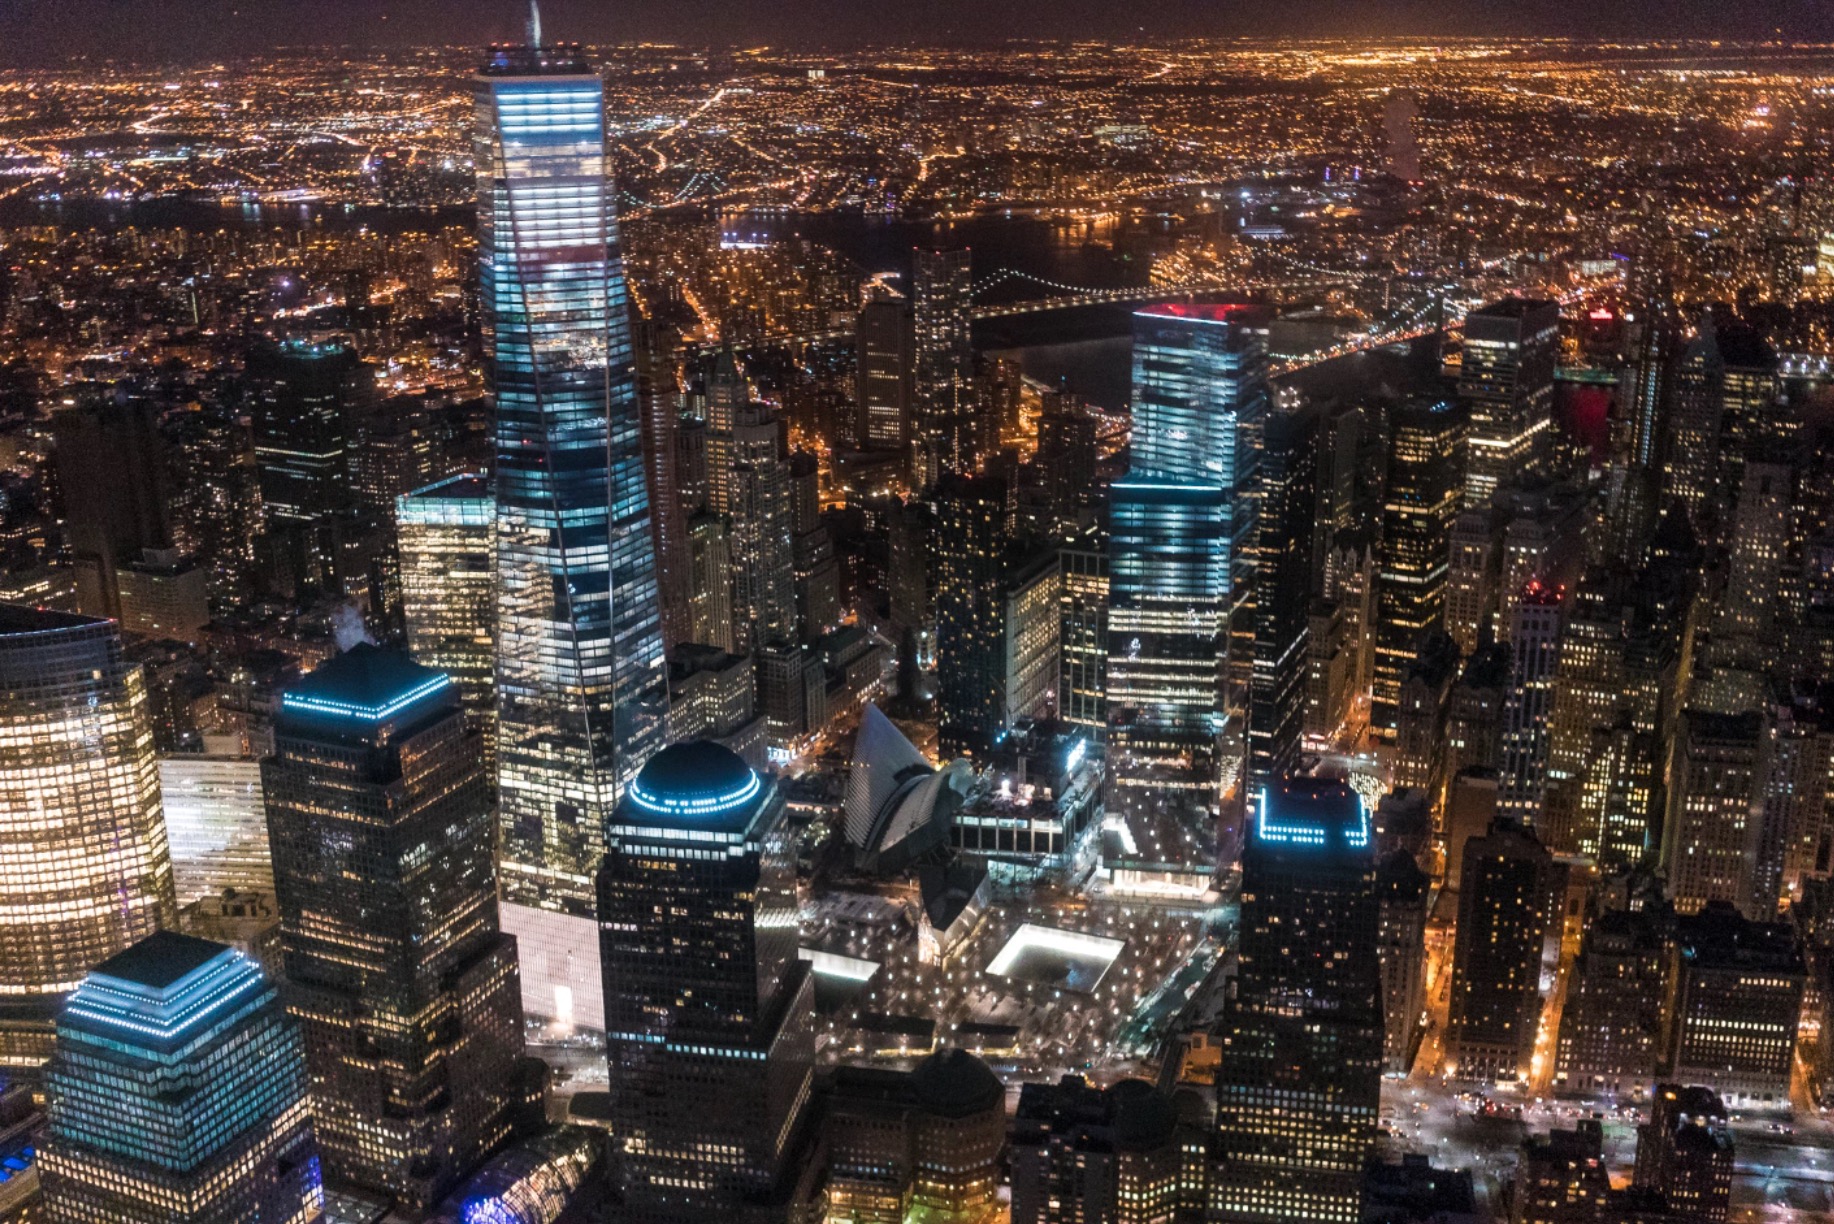 Blog | How to Shoot Skyscraper at Night from a Helicopter